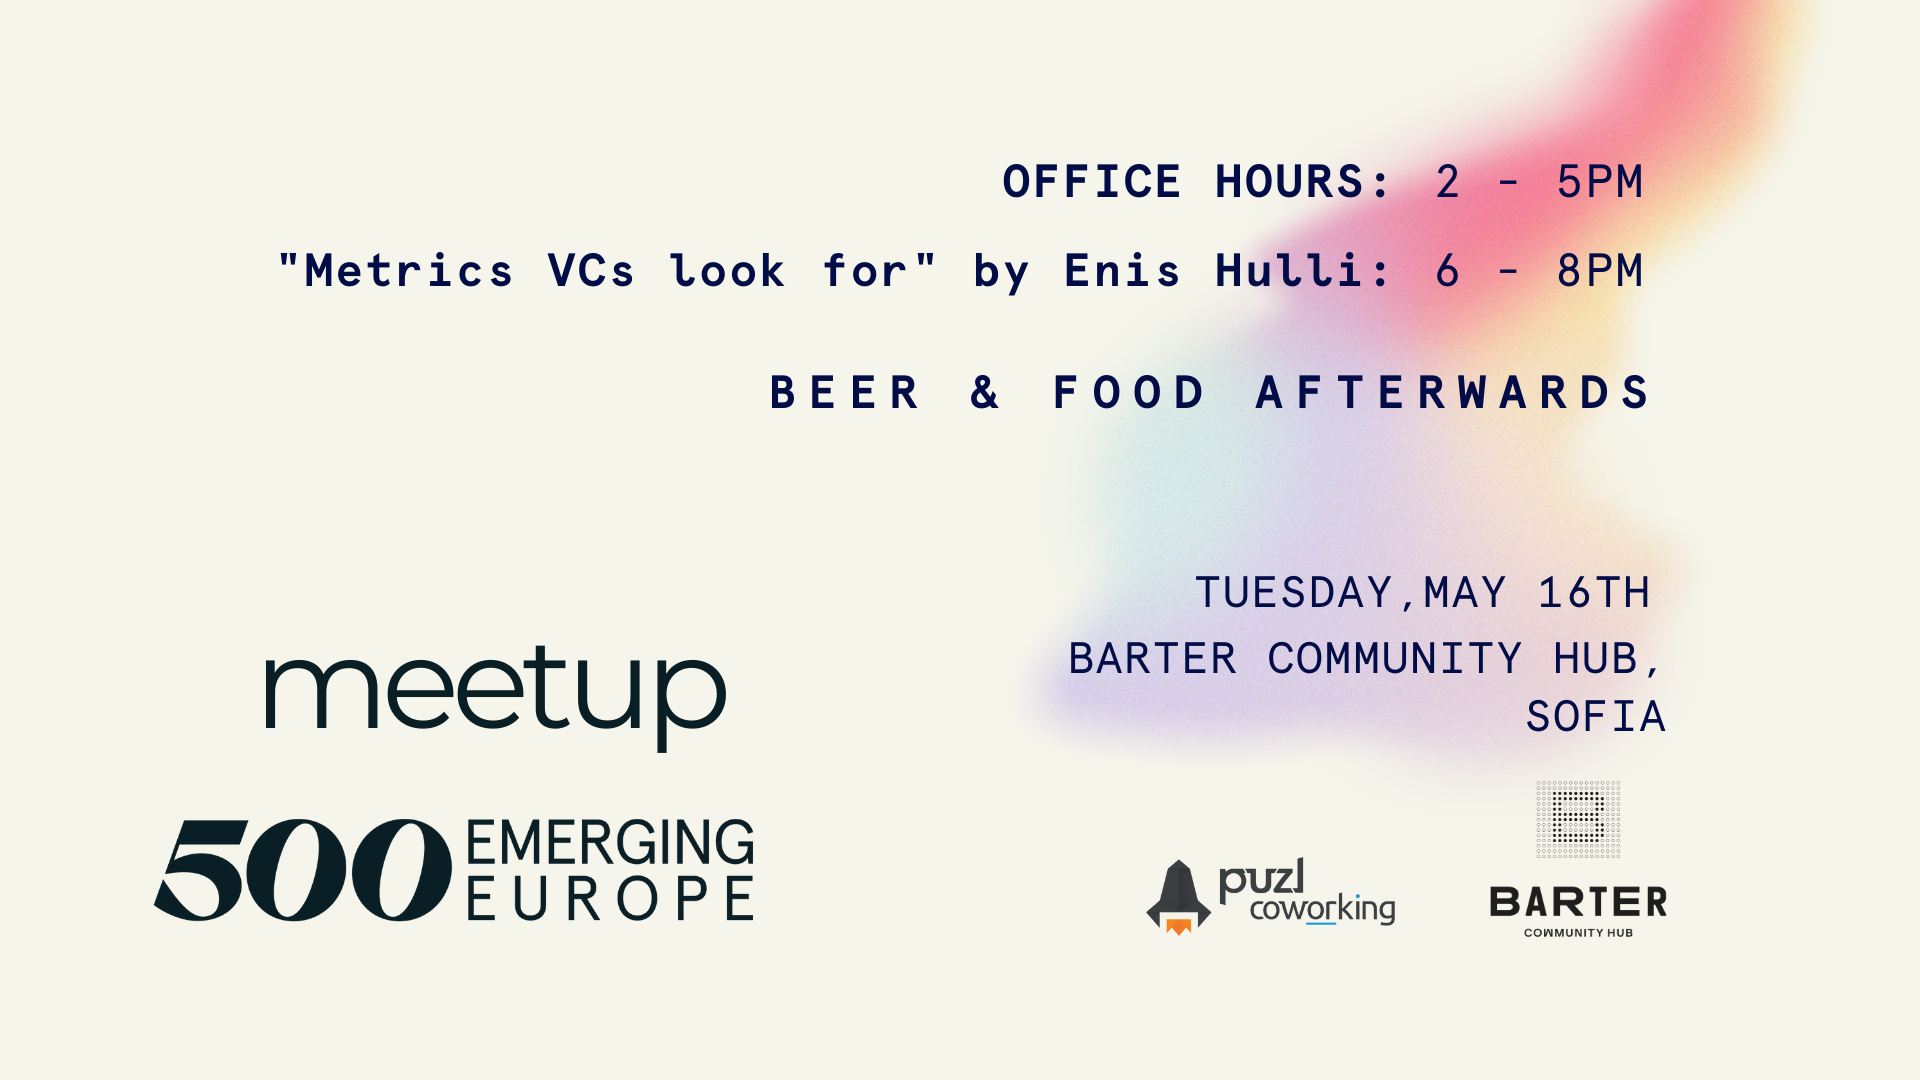 500 Emerging Europe Meetup - office hours and drinks at Barter Community Hub